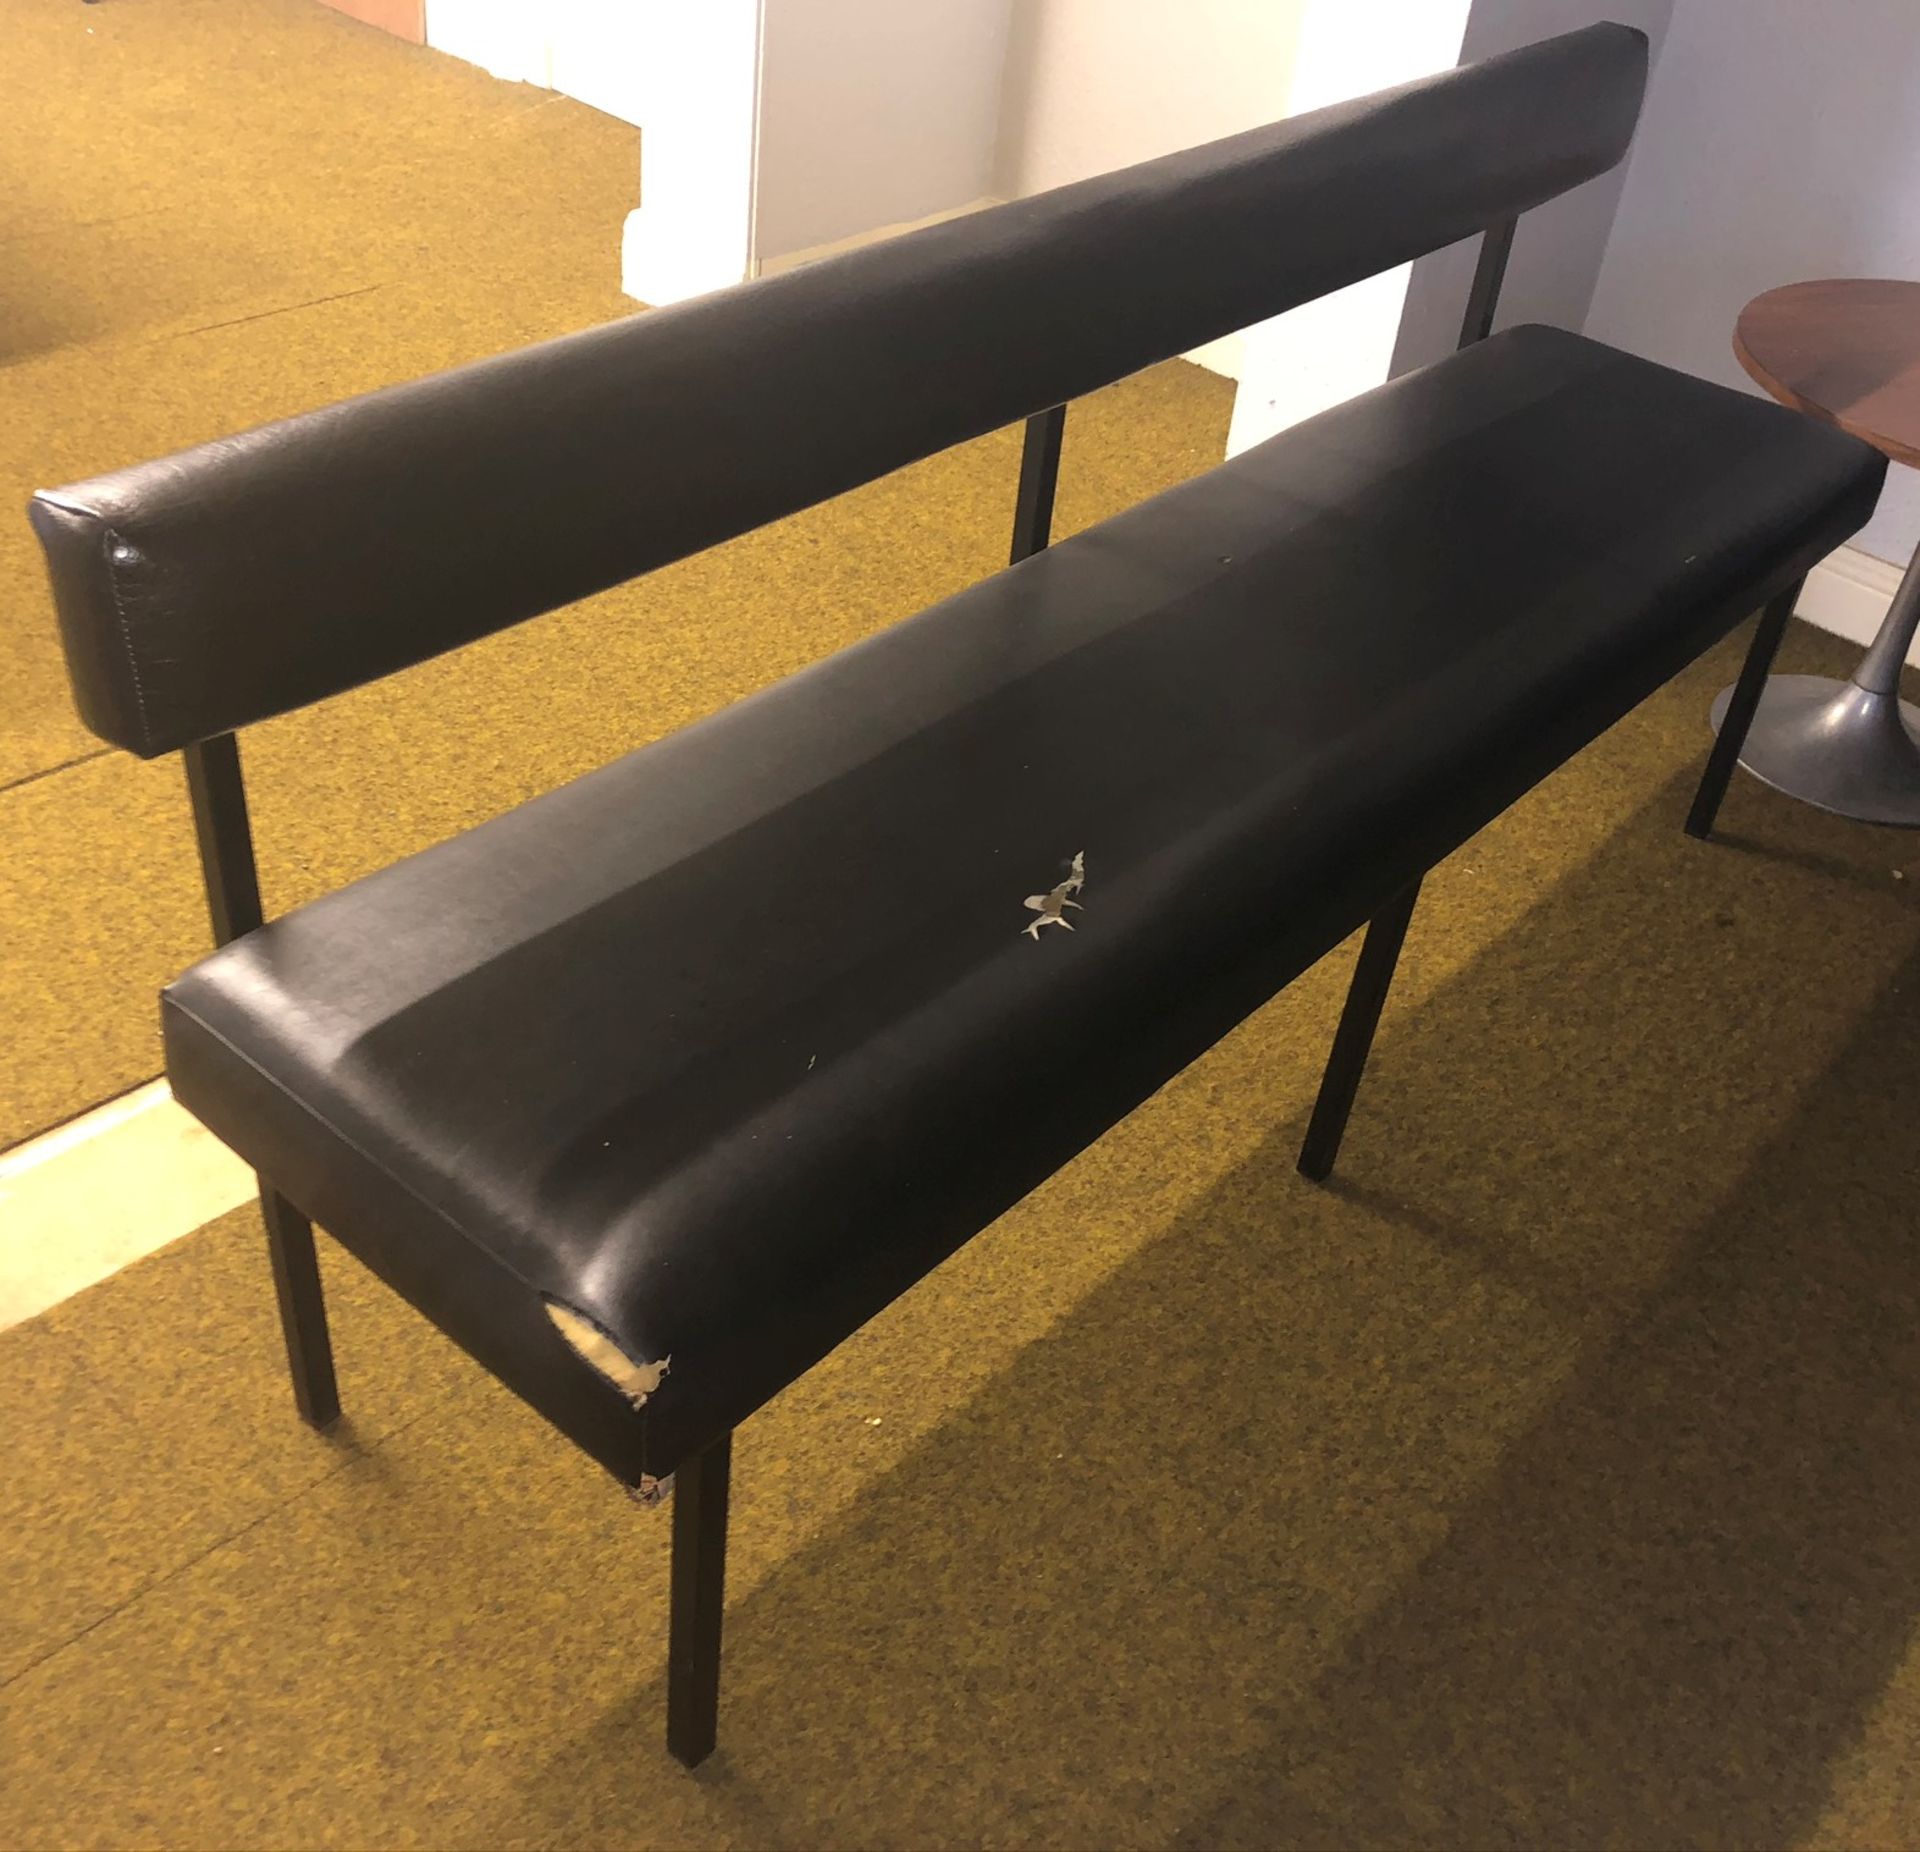 6 x Faux Leather Benches in Black - Image 3 of 5